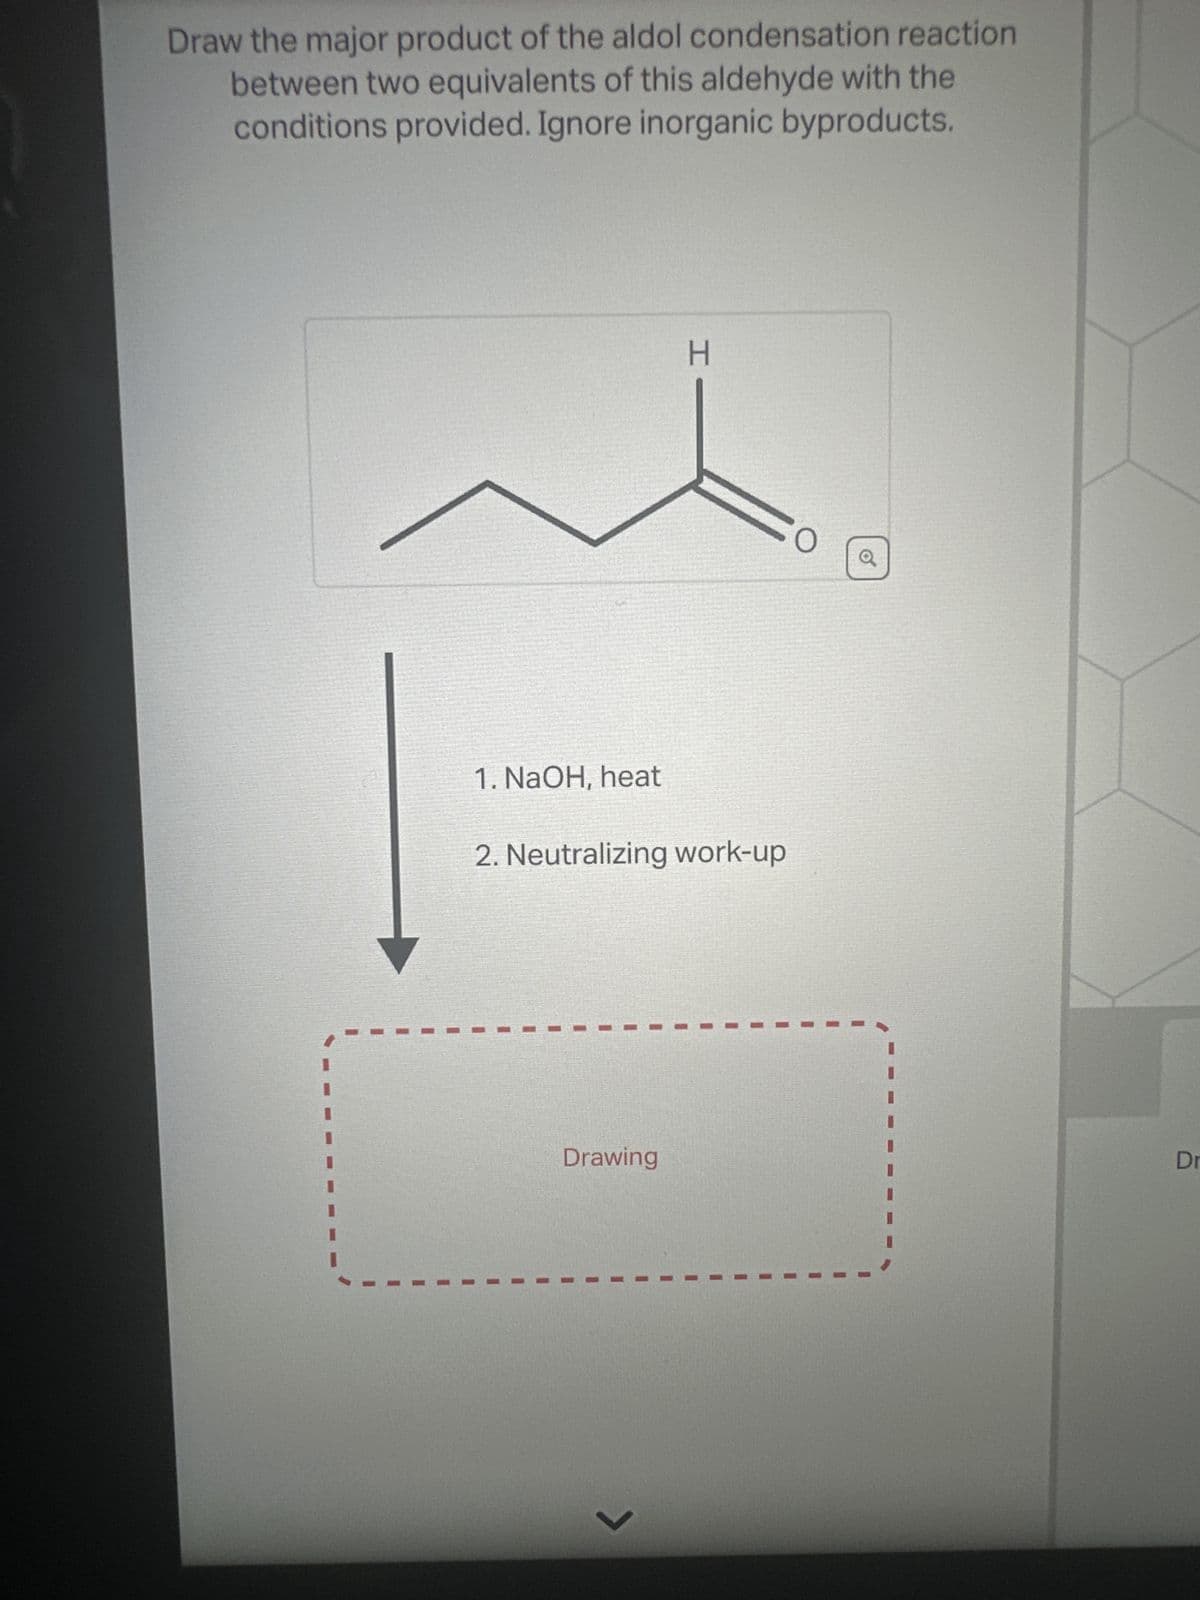 Draw the major product of the aldol condensation reaction
between two equivalents of this aldehyde with the
conditions provided. Ignore inorganic byproducts.
H
1. NaOH, heat
2. Neutralizing work-up
Drawing
Dr
く